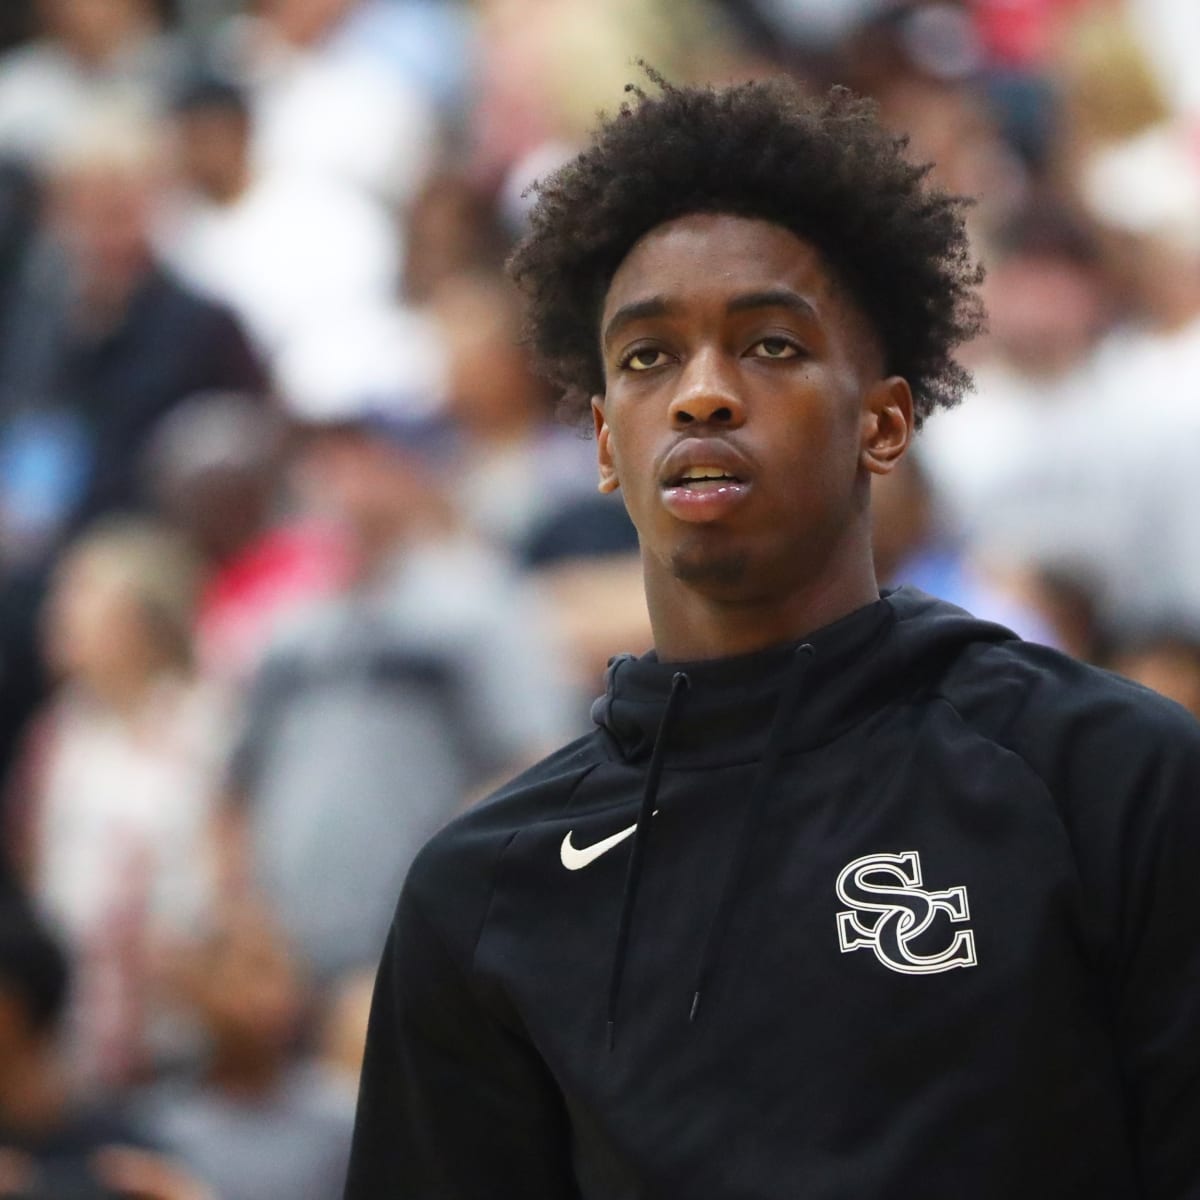 Zaire Wade, son of Dwyane Wade, will play for Brewster Academy